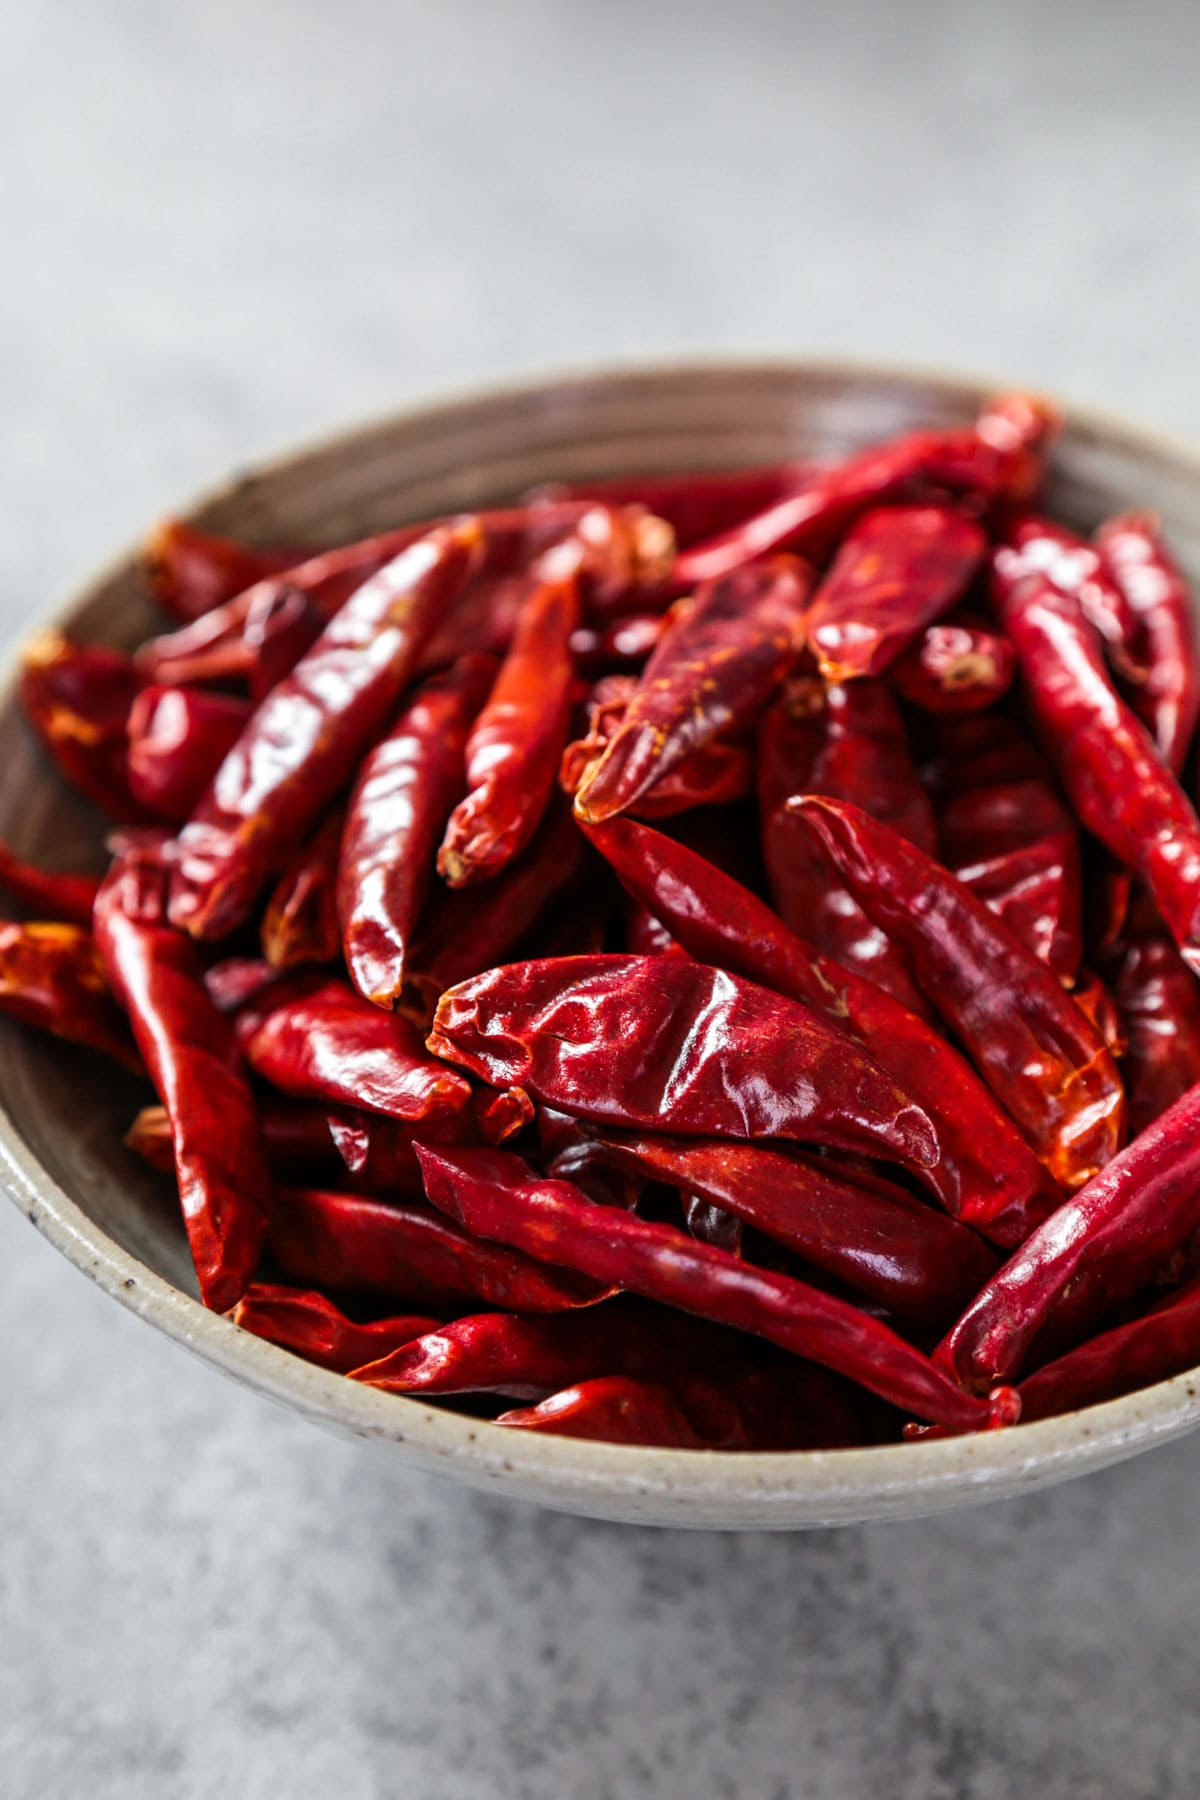 Dried Red Chilies